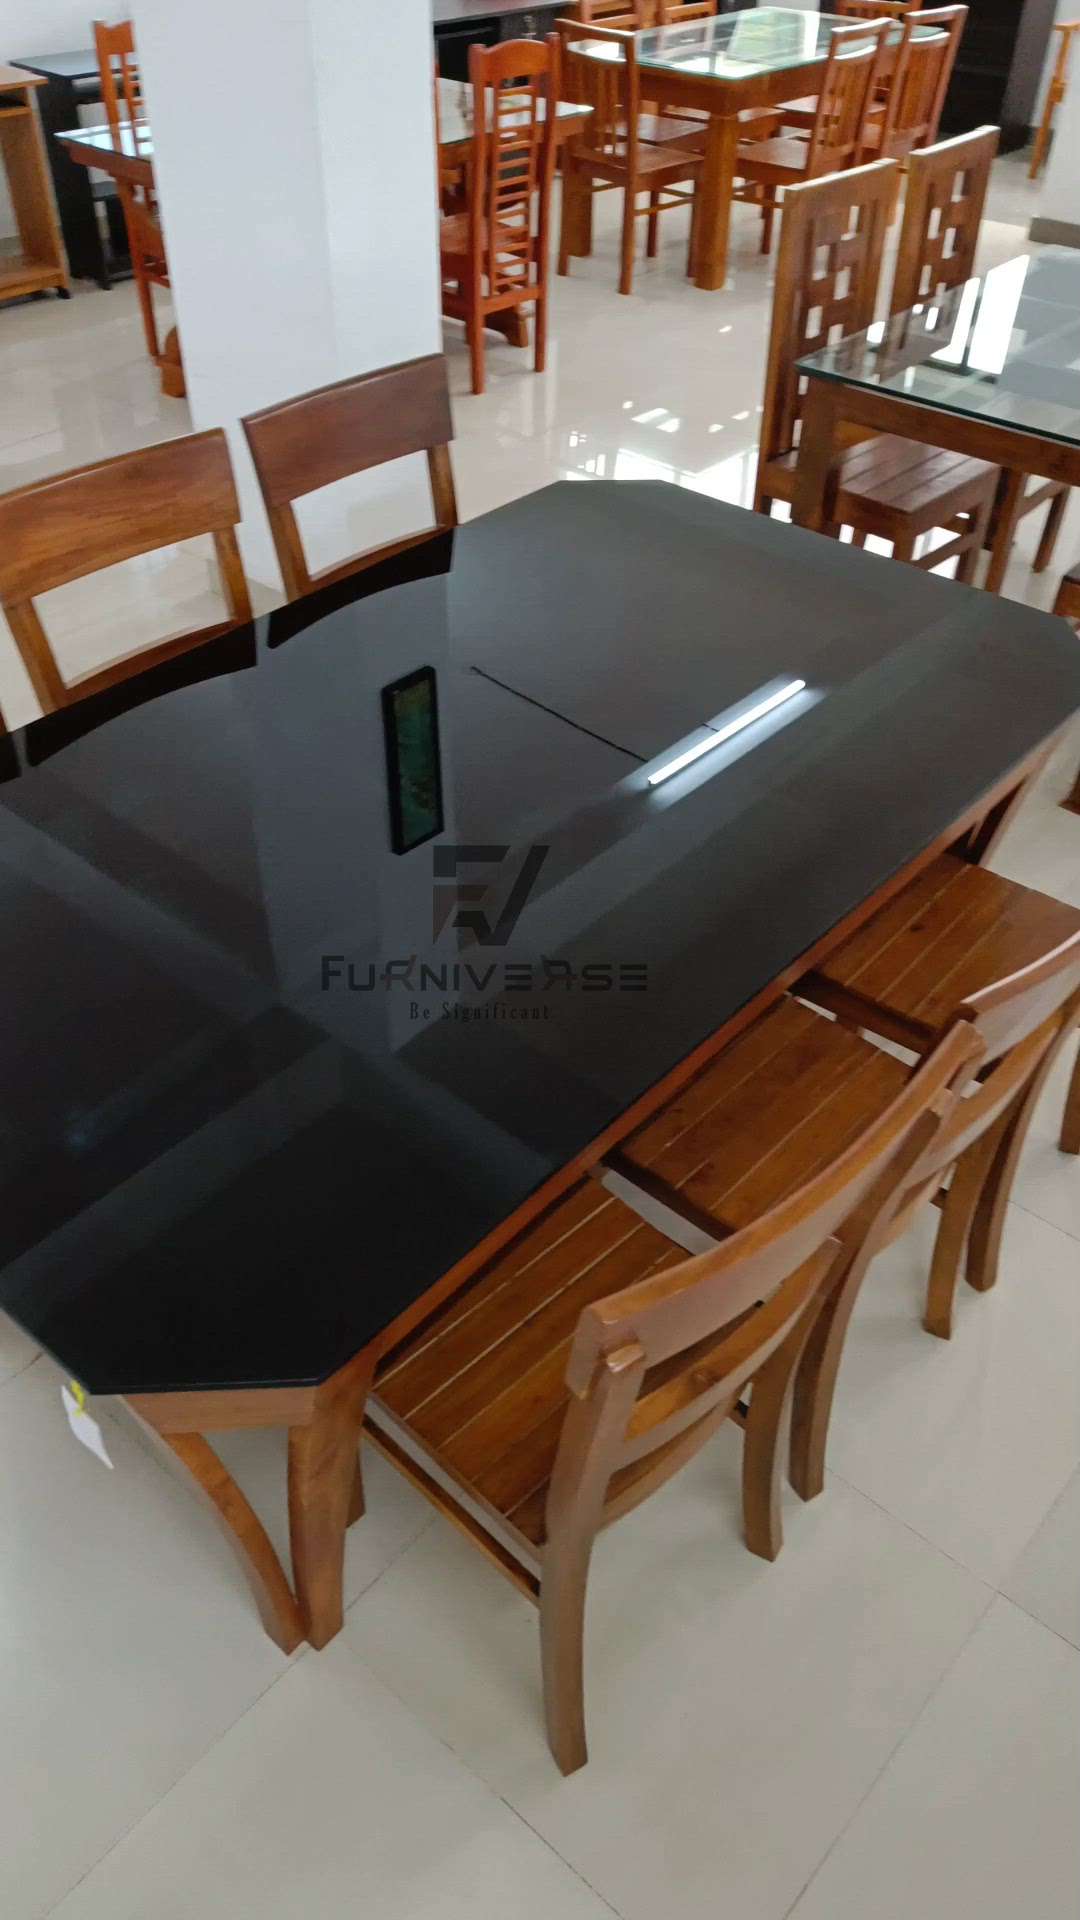 Dining Table Collection 


#DiningChairs #DiningTable #diningset #DiningTableAndChairs #InteriorDesigner #new_home #polsh #Furnishings #furnitures #furnitureshop #fun@work #Architect #keralafurniture